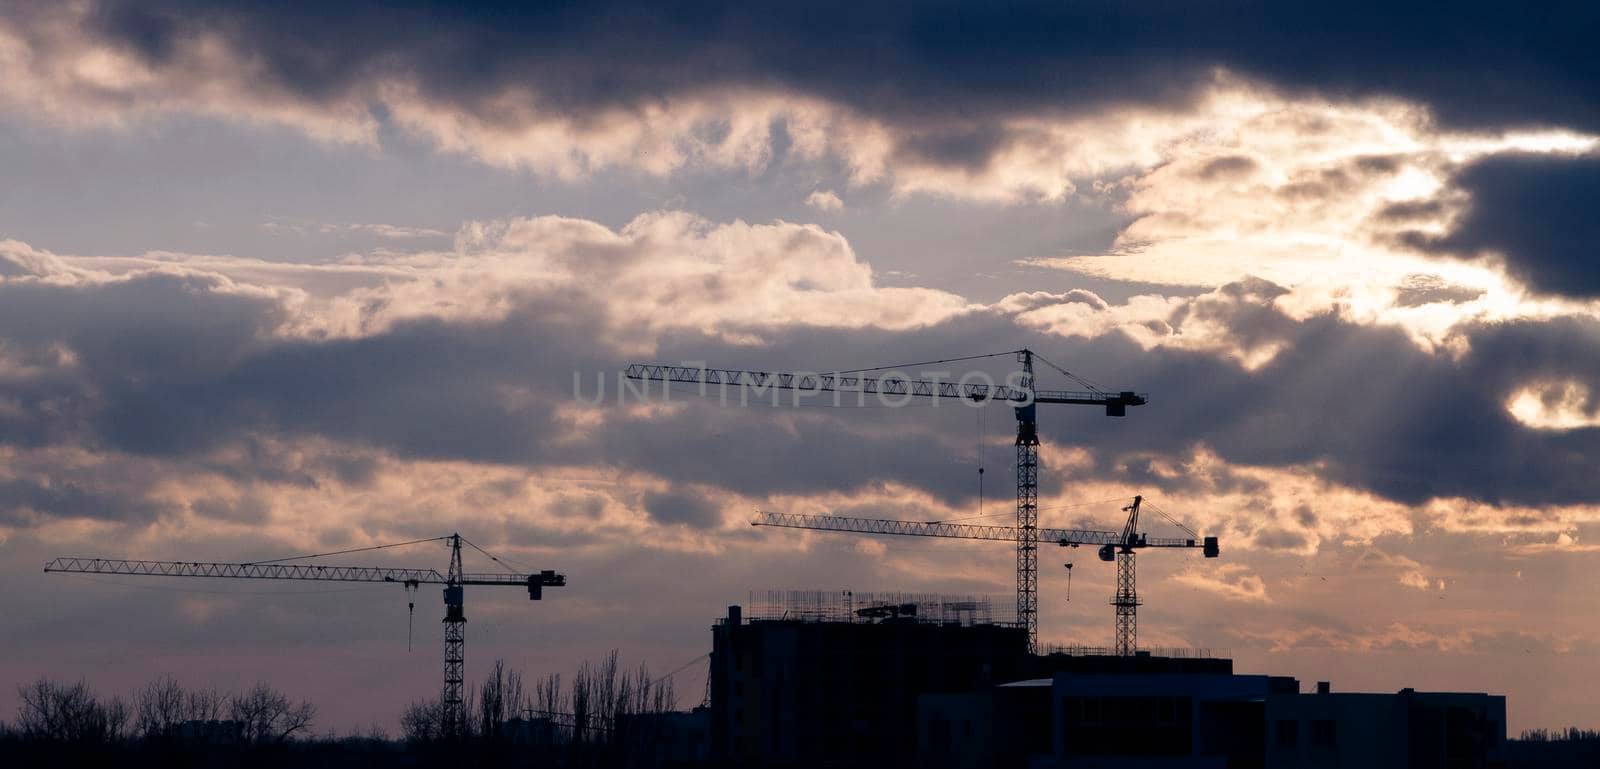 Silhouettes of building cranes at sunset. by Jannetta